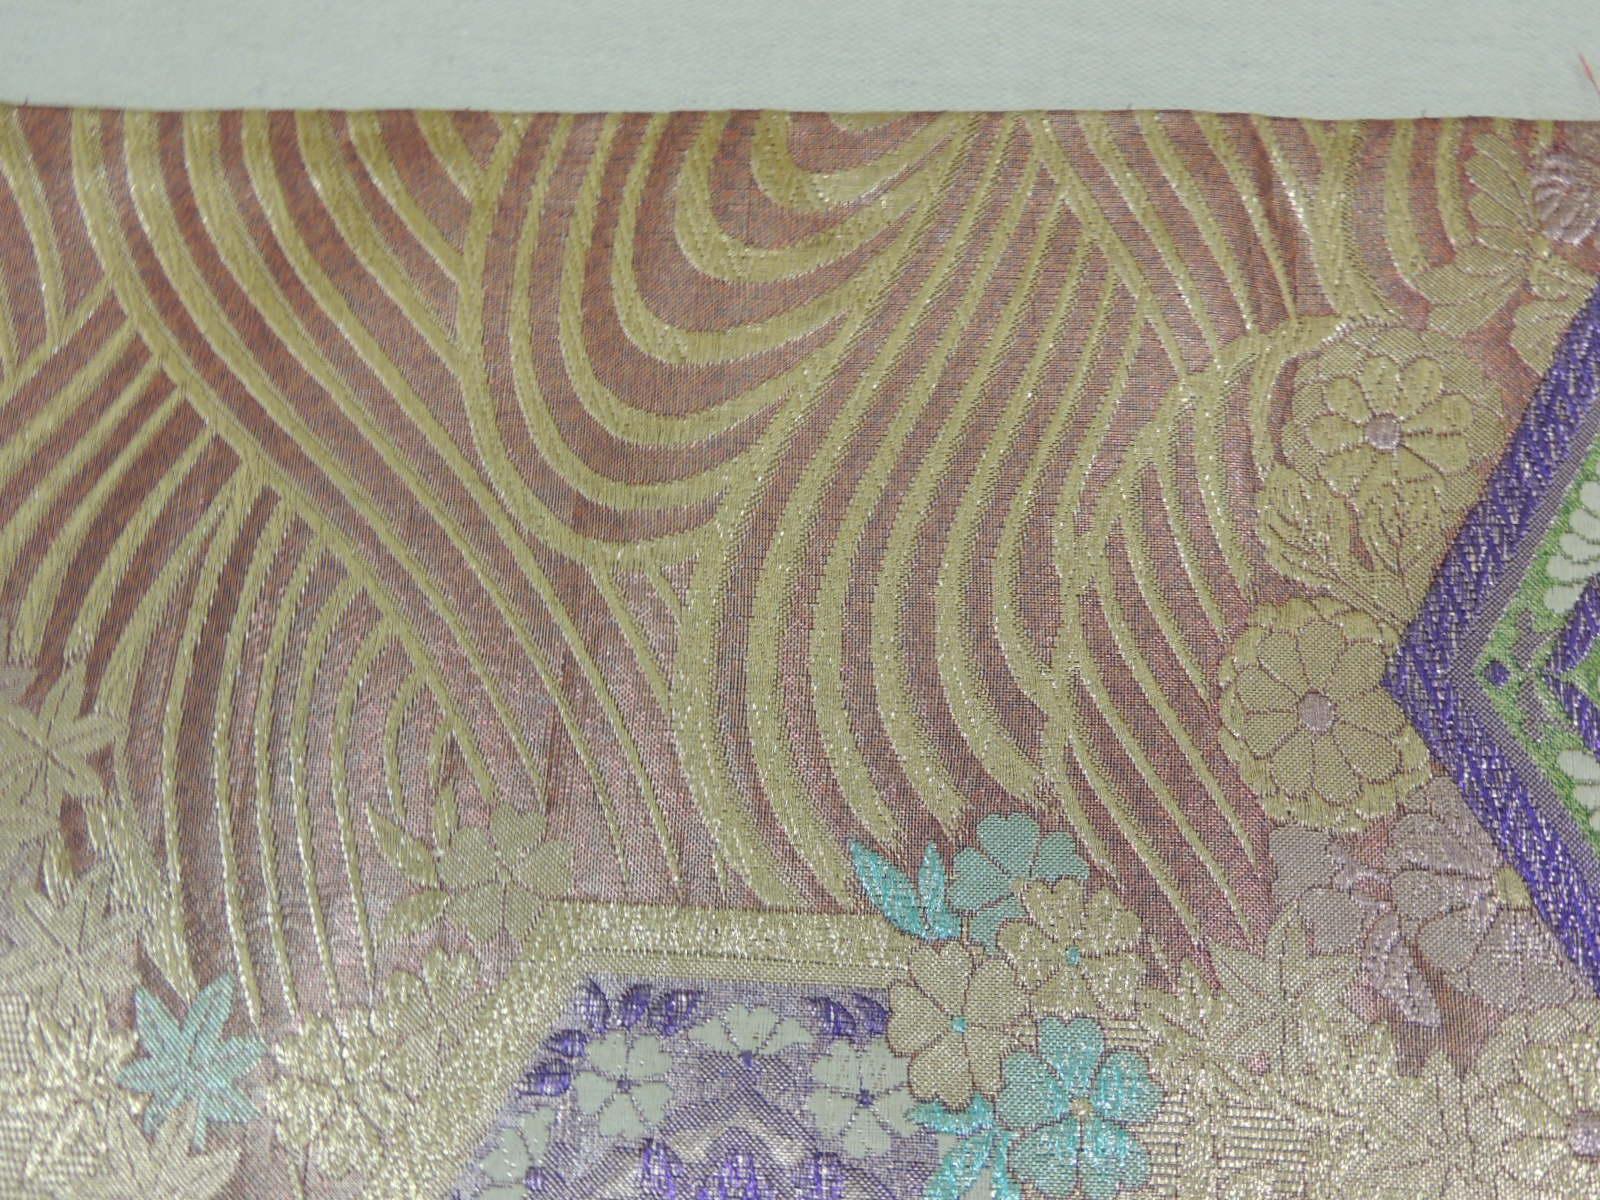 Long Golden Textured Woven Obi Textile Depicting Flowers in Bloom 4